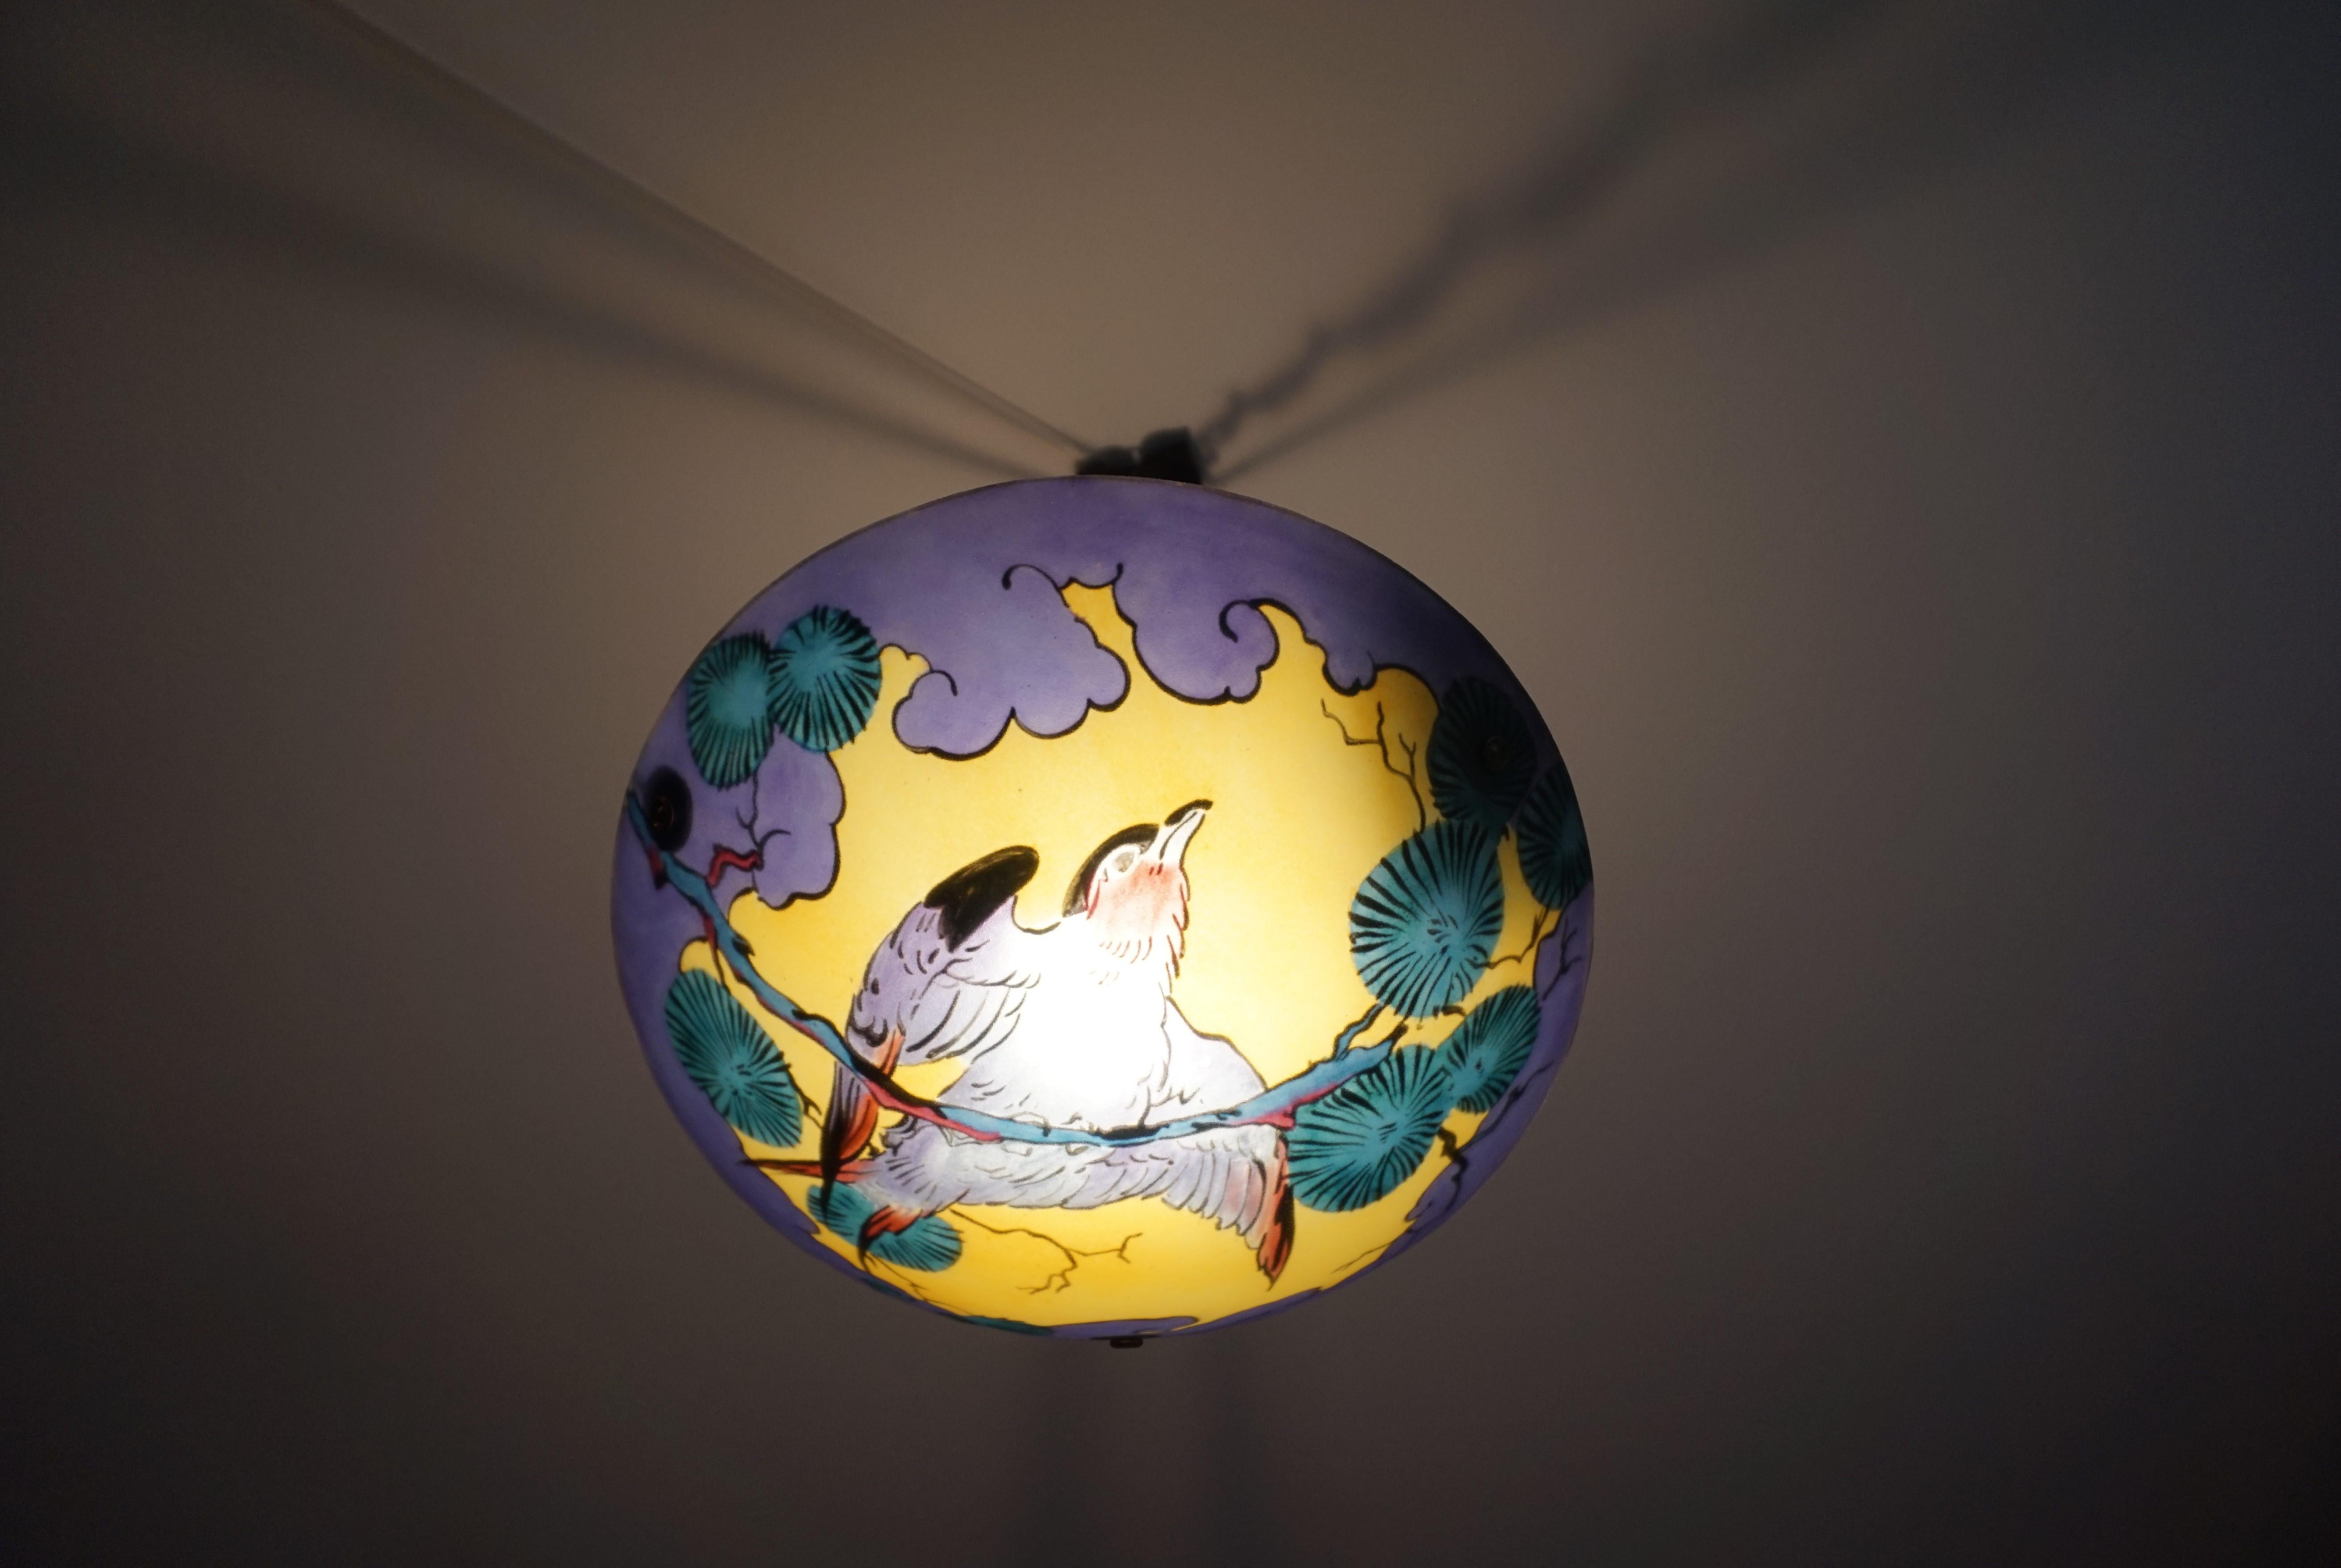 Unique and stunning work of lighting art, attributed to David Gueron a.k.a. Degué.

If you are passionate about early 20th century decorative art then you will love this striking pendant. What you are seeing here is a one of a kind, hand painted,